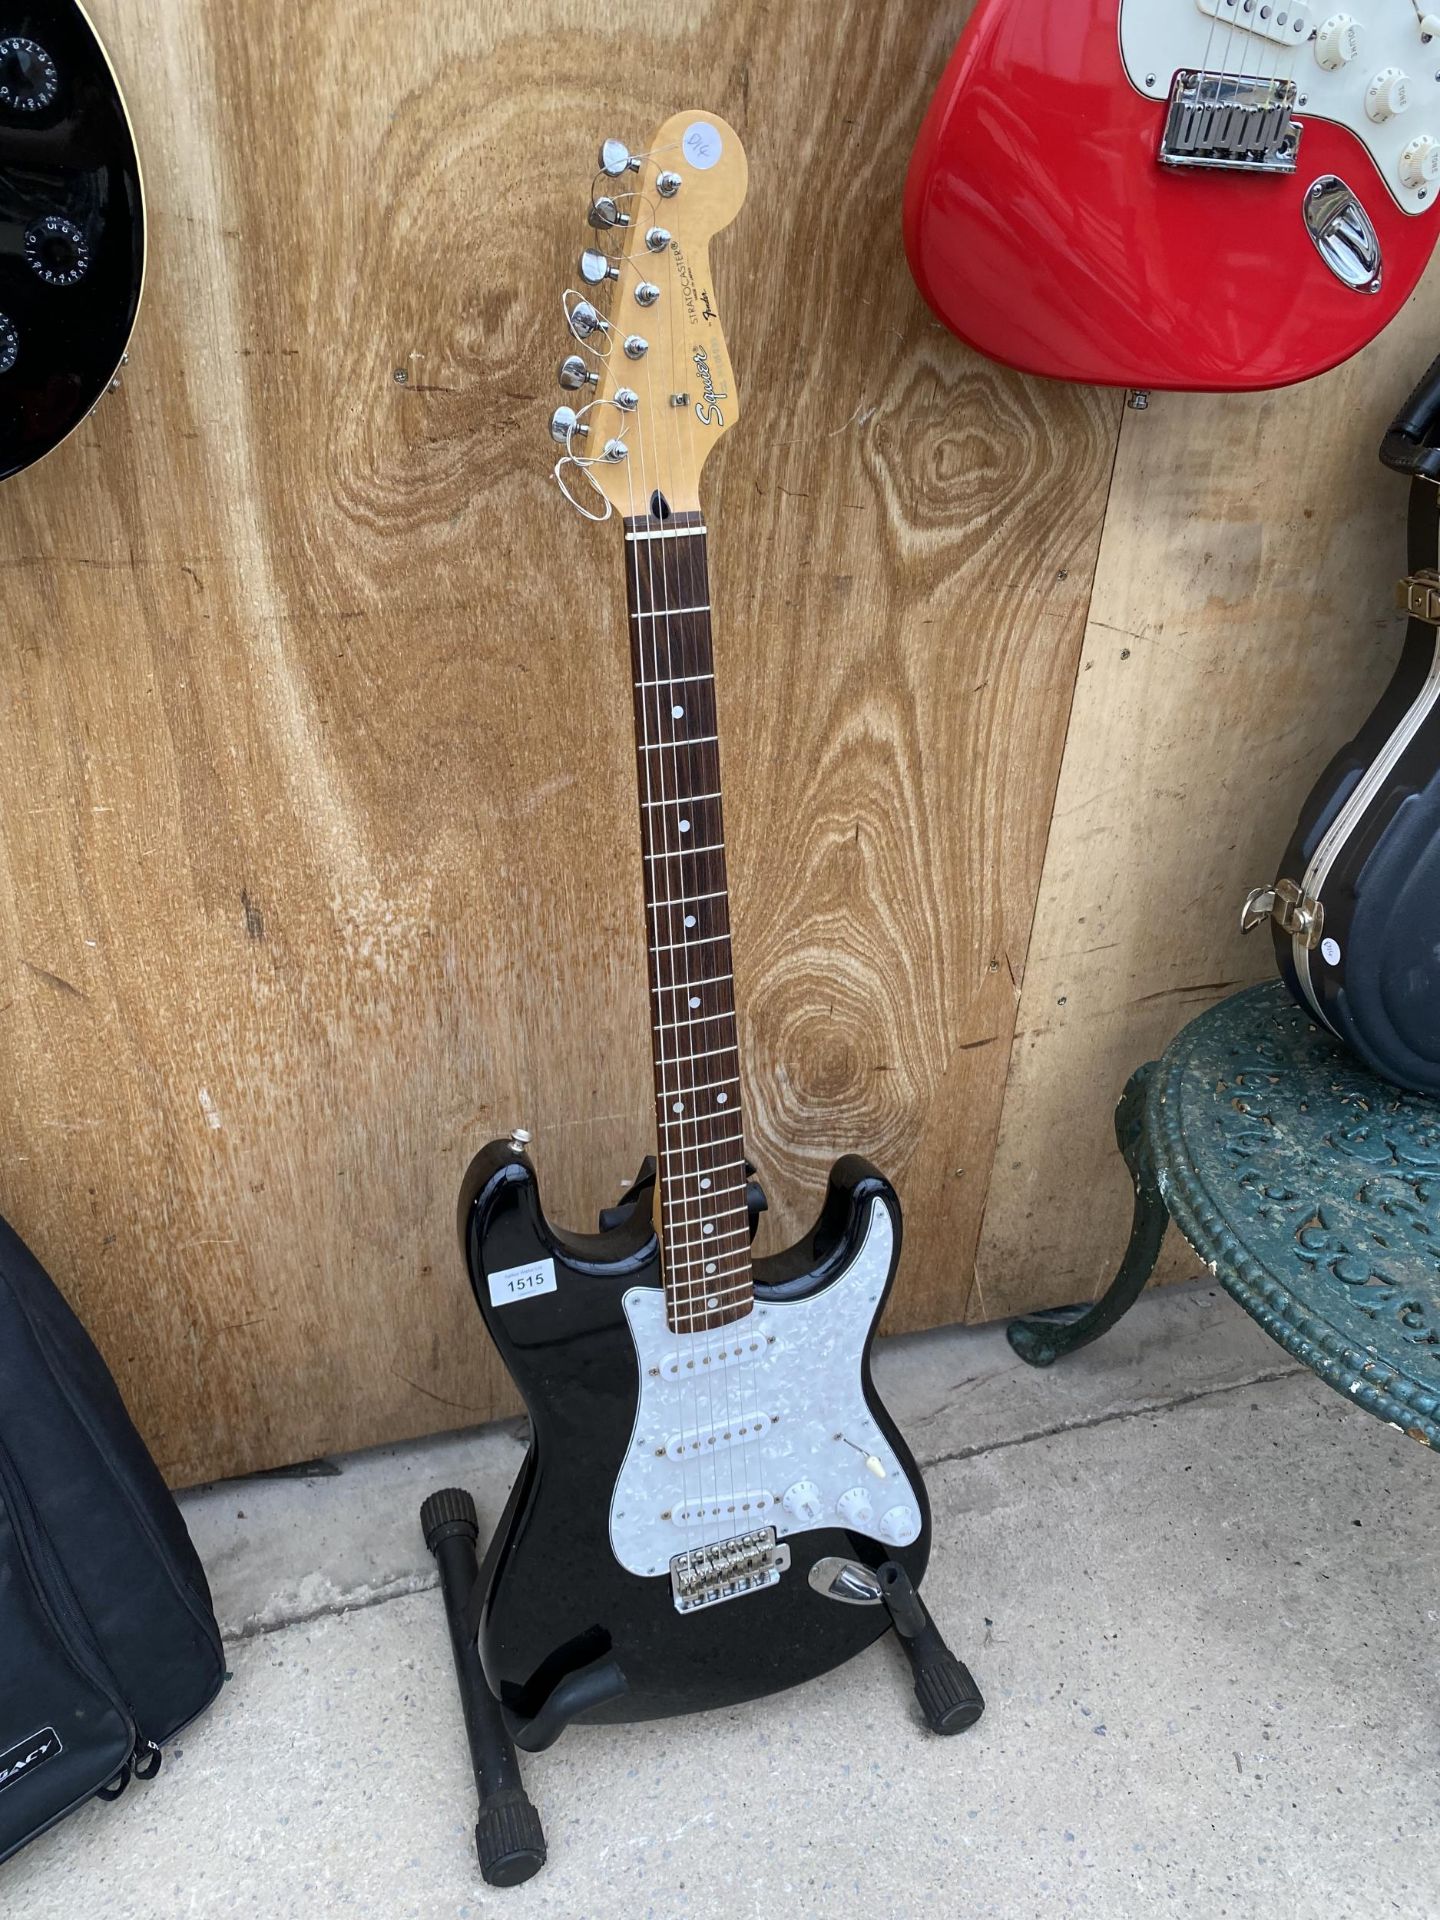 A BLACK SQUIRE STRATOCASTER BY FENDER ELECTRIC GUITAR (SERIAL NUMBER: N006099)